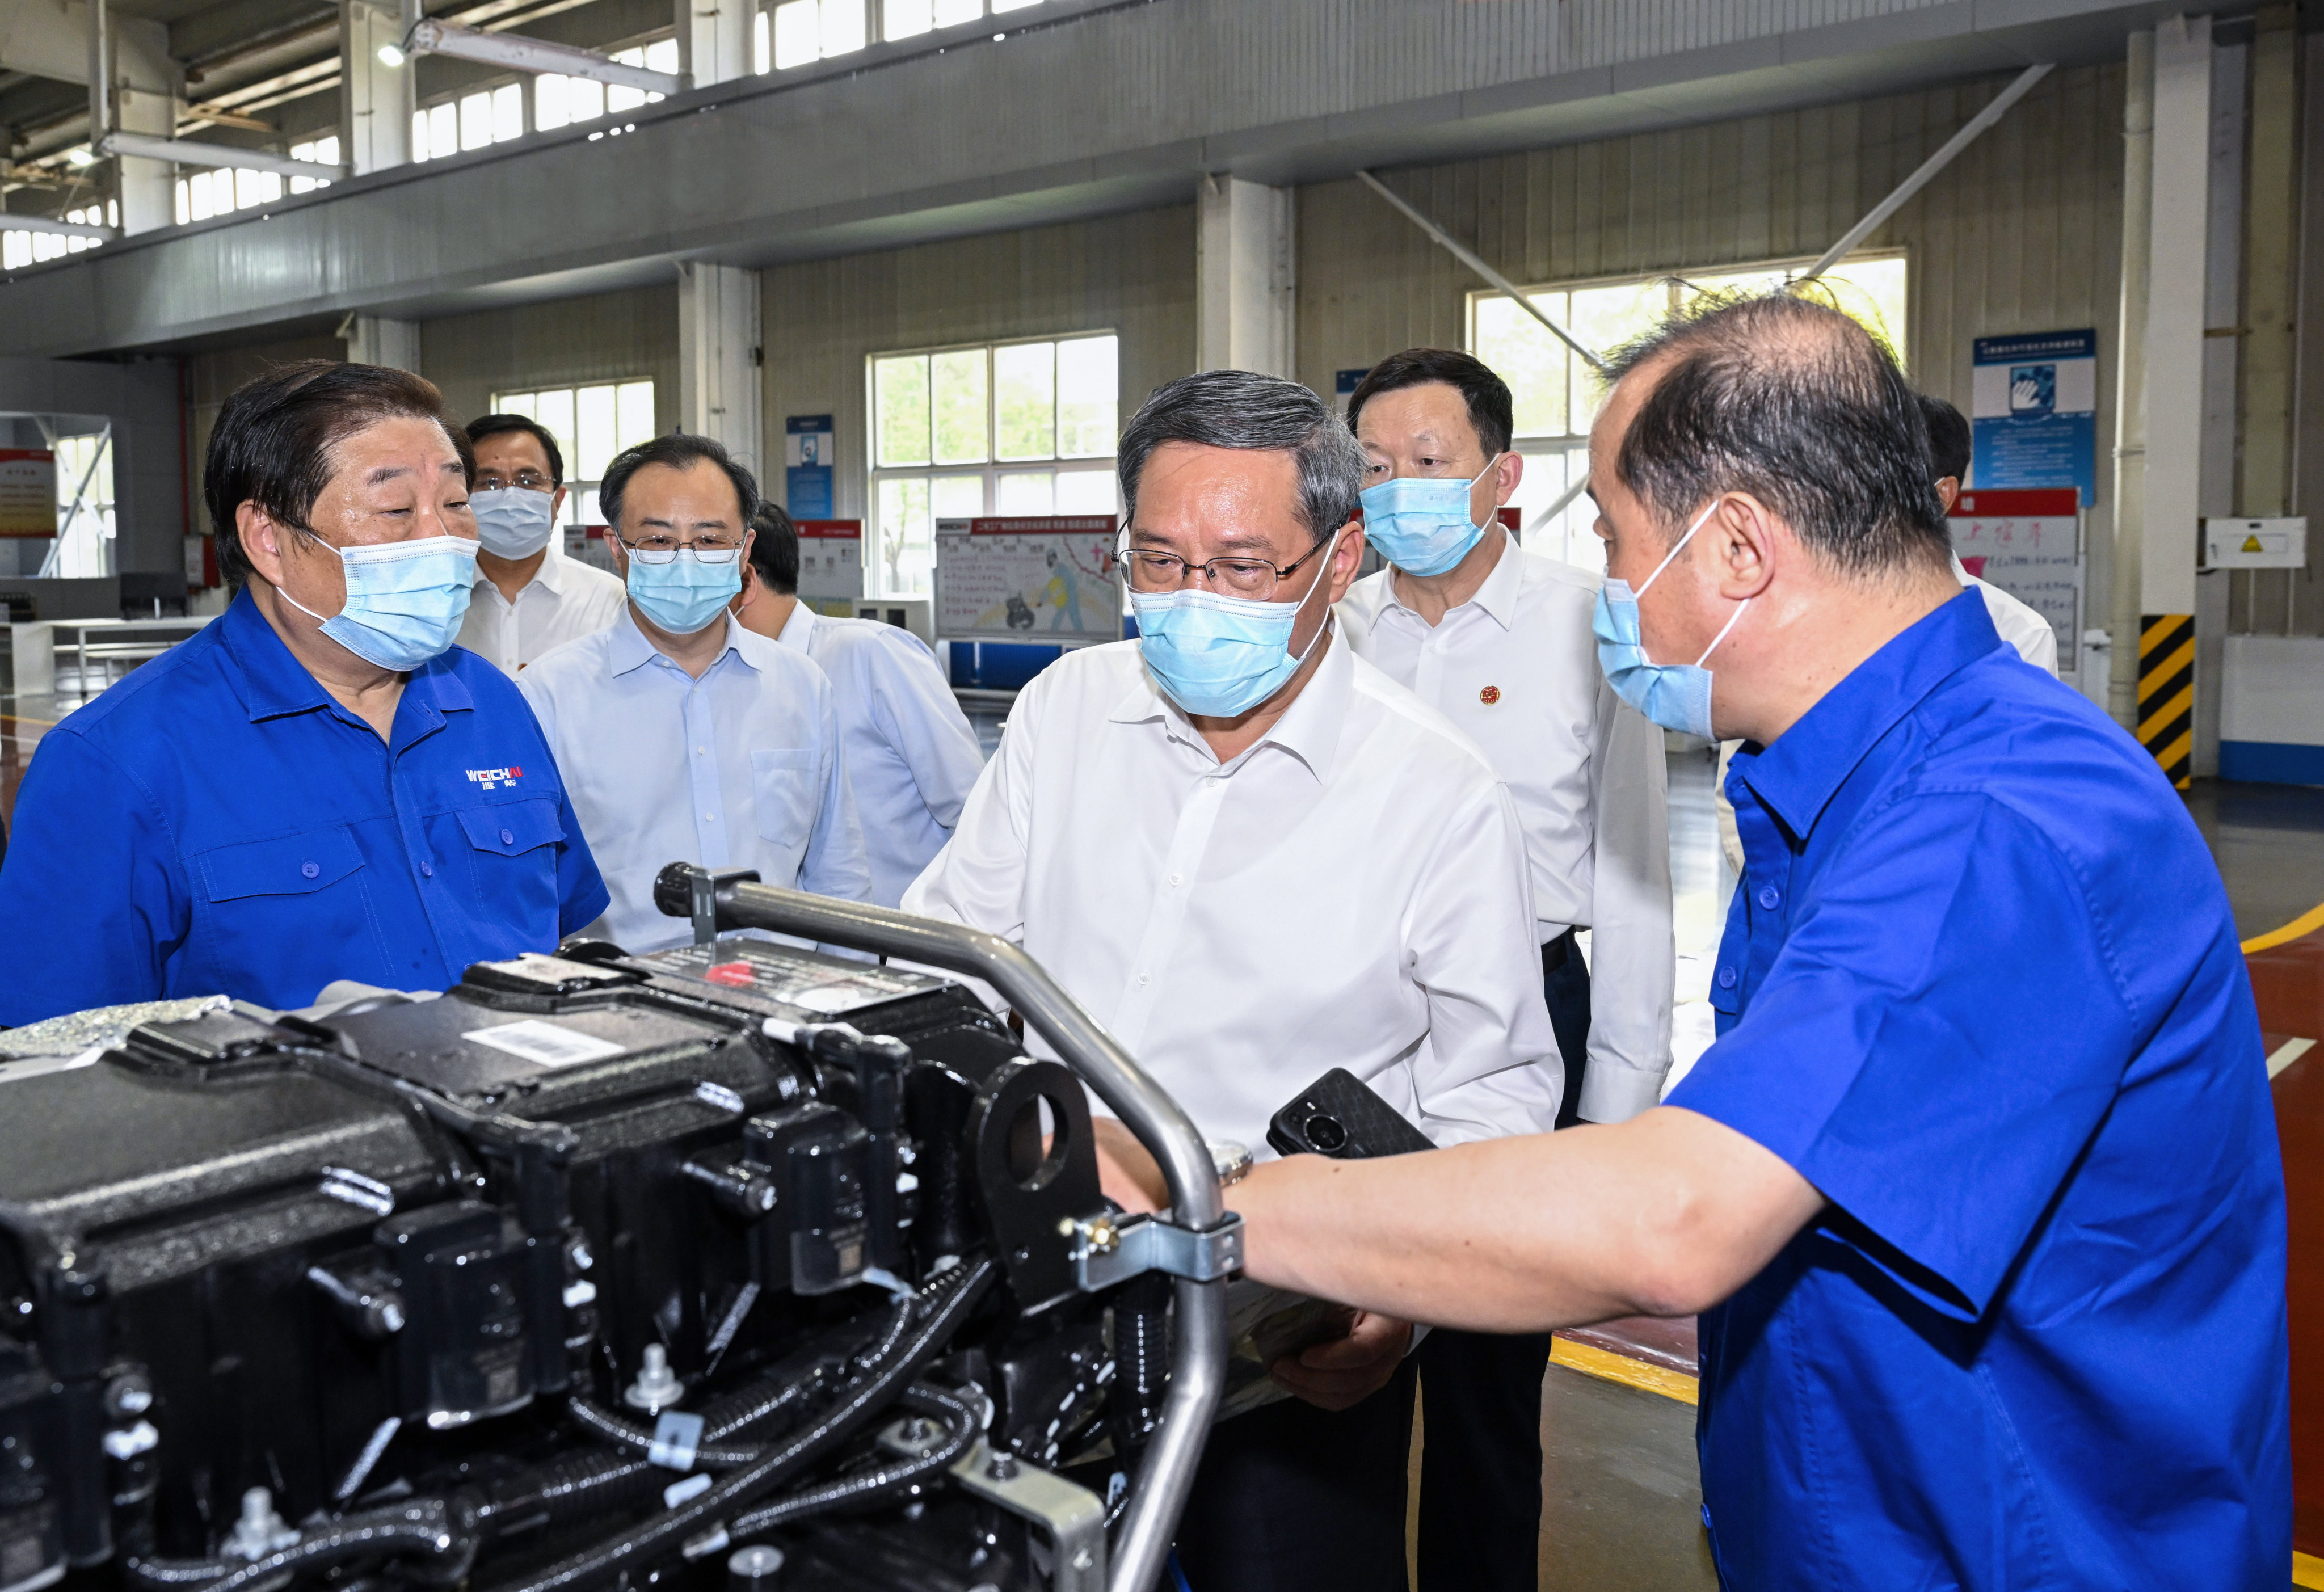 Premier Li Qiang visits Weichai Holding Group in Weifang, Shandong province, on Wednesday. Photo: Xinhua